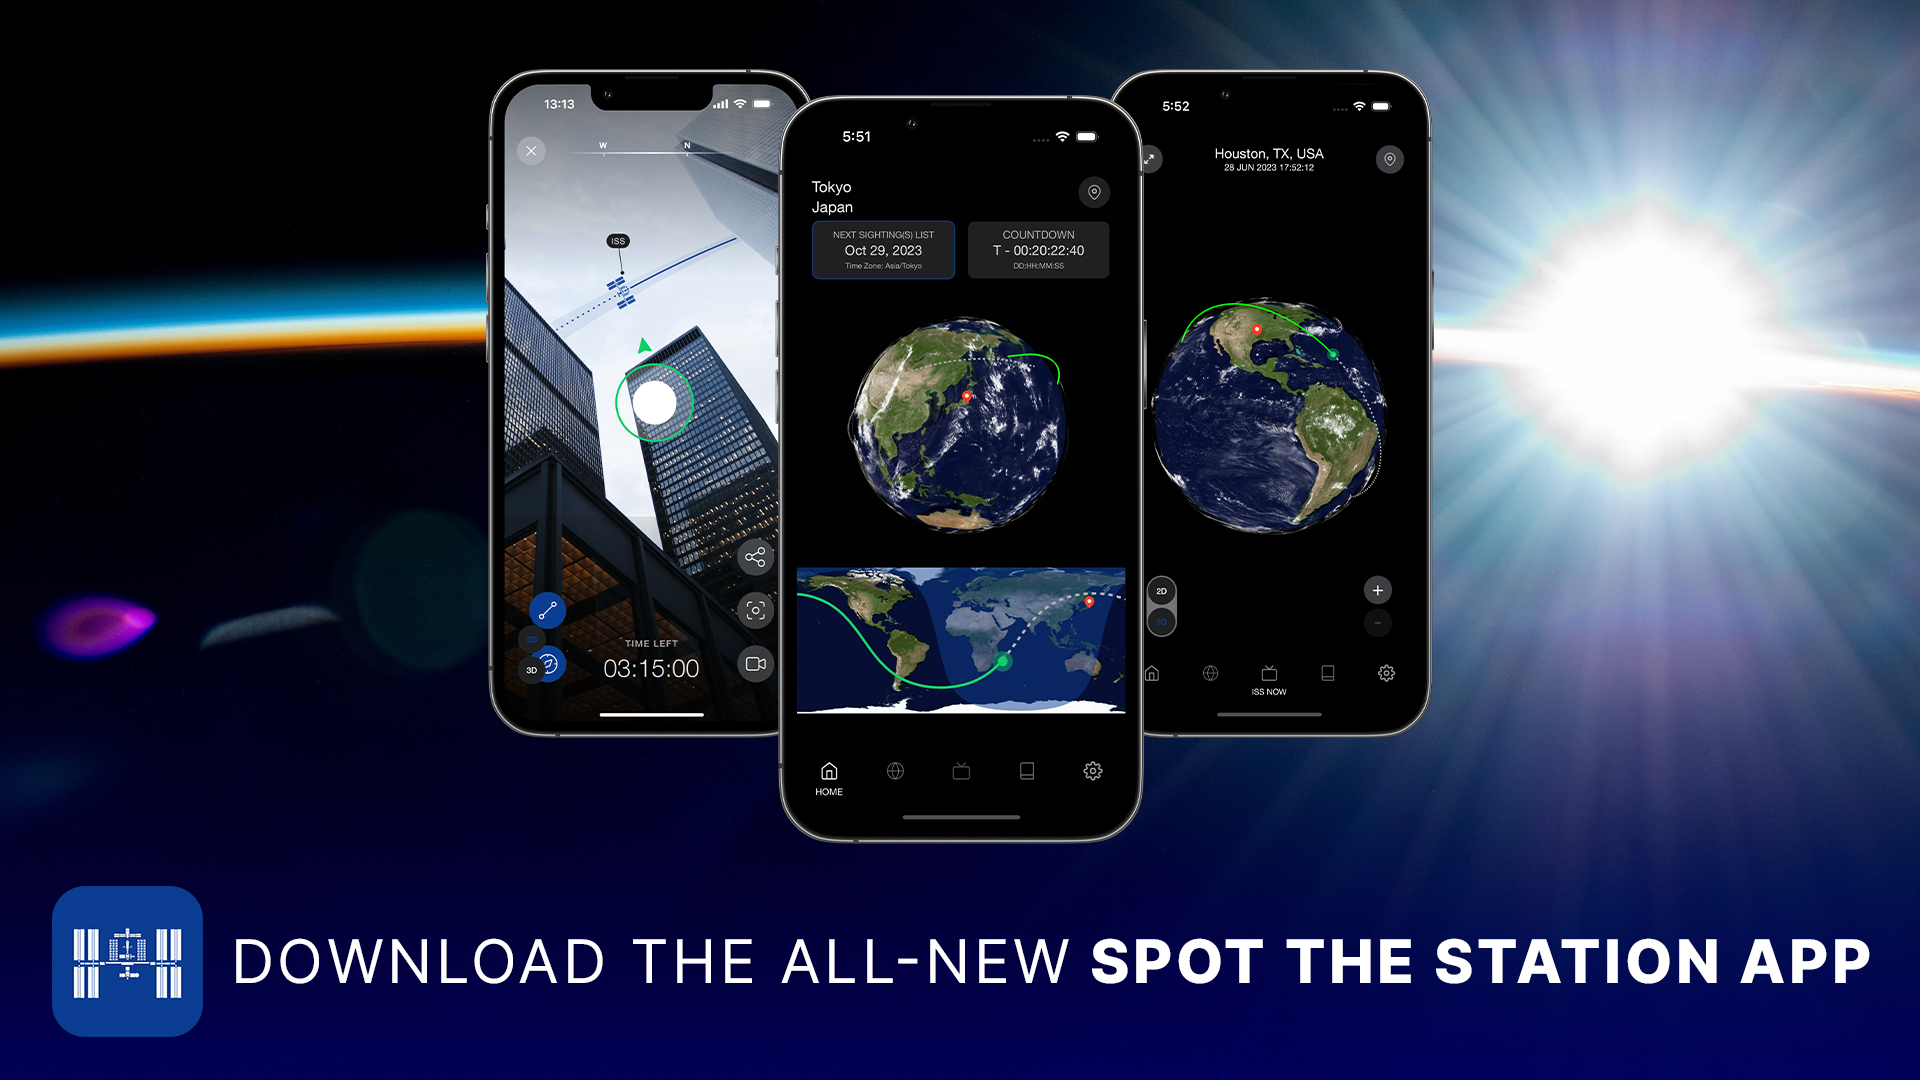 An augmented reality interface makes it easier for users to locate the station and provides options for capturing and sharing pictures and videos of their sightings in real-time. The app’s built-in compass will show you where the space station is – even if you’re on the other side of the globe.